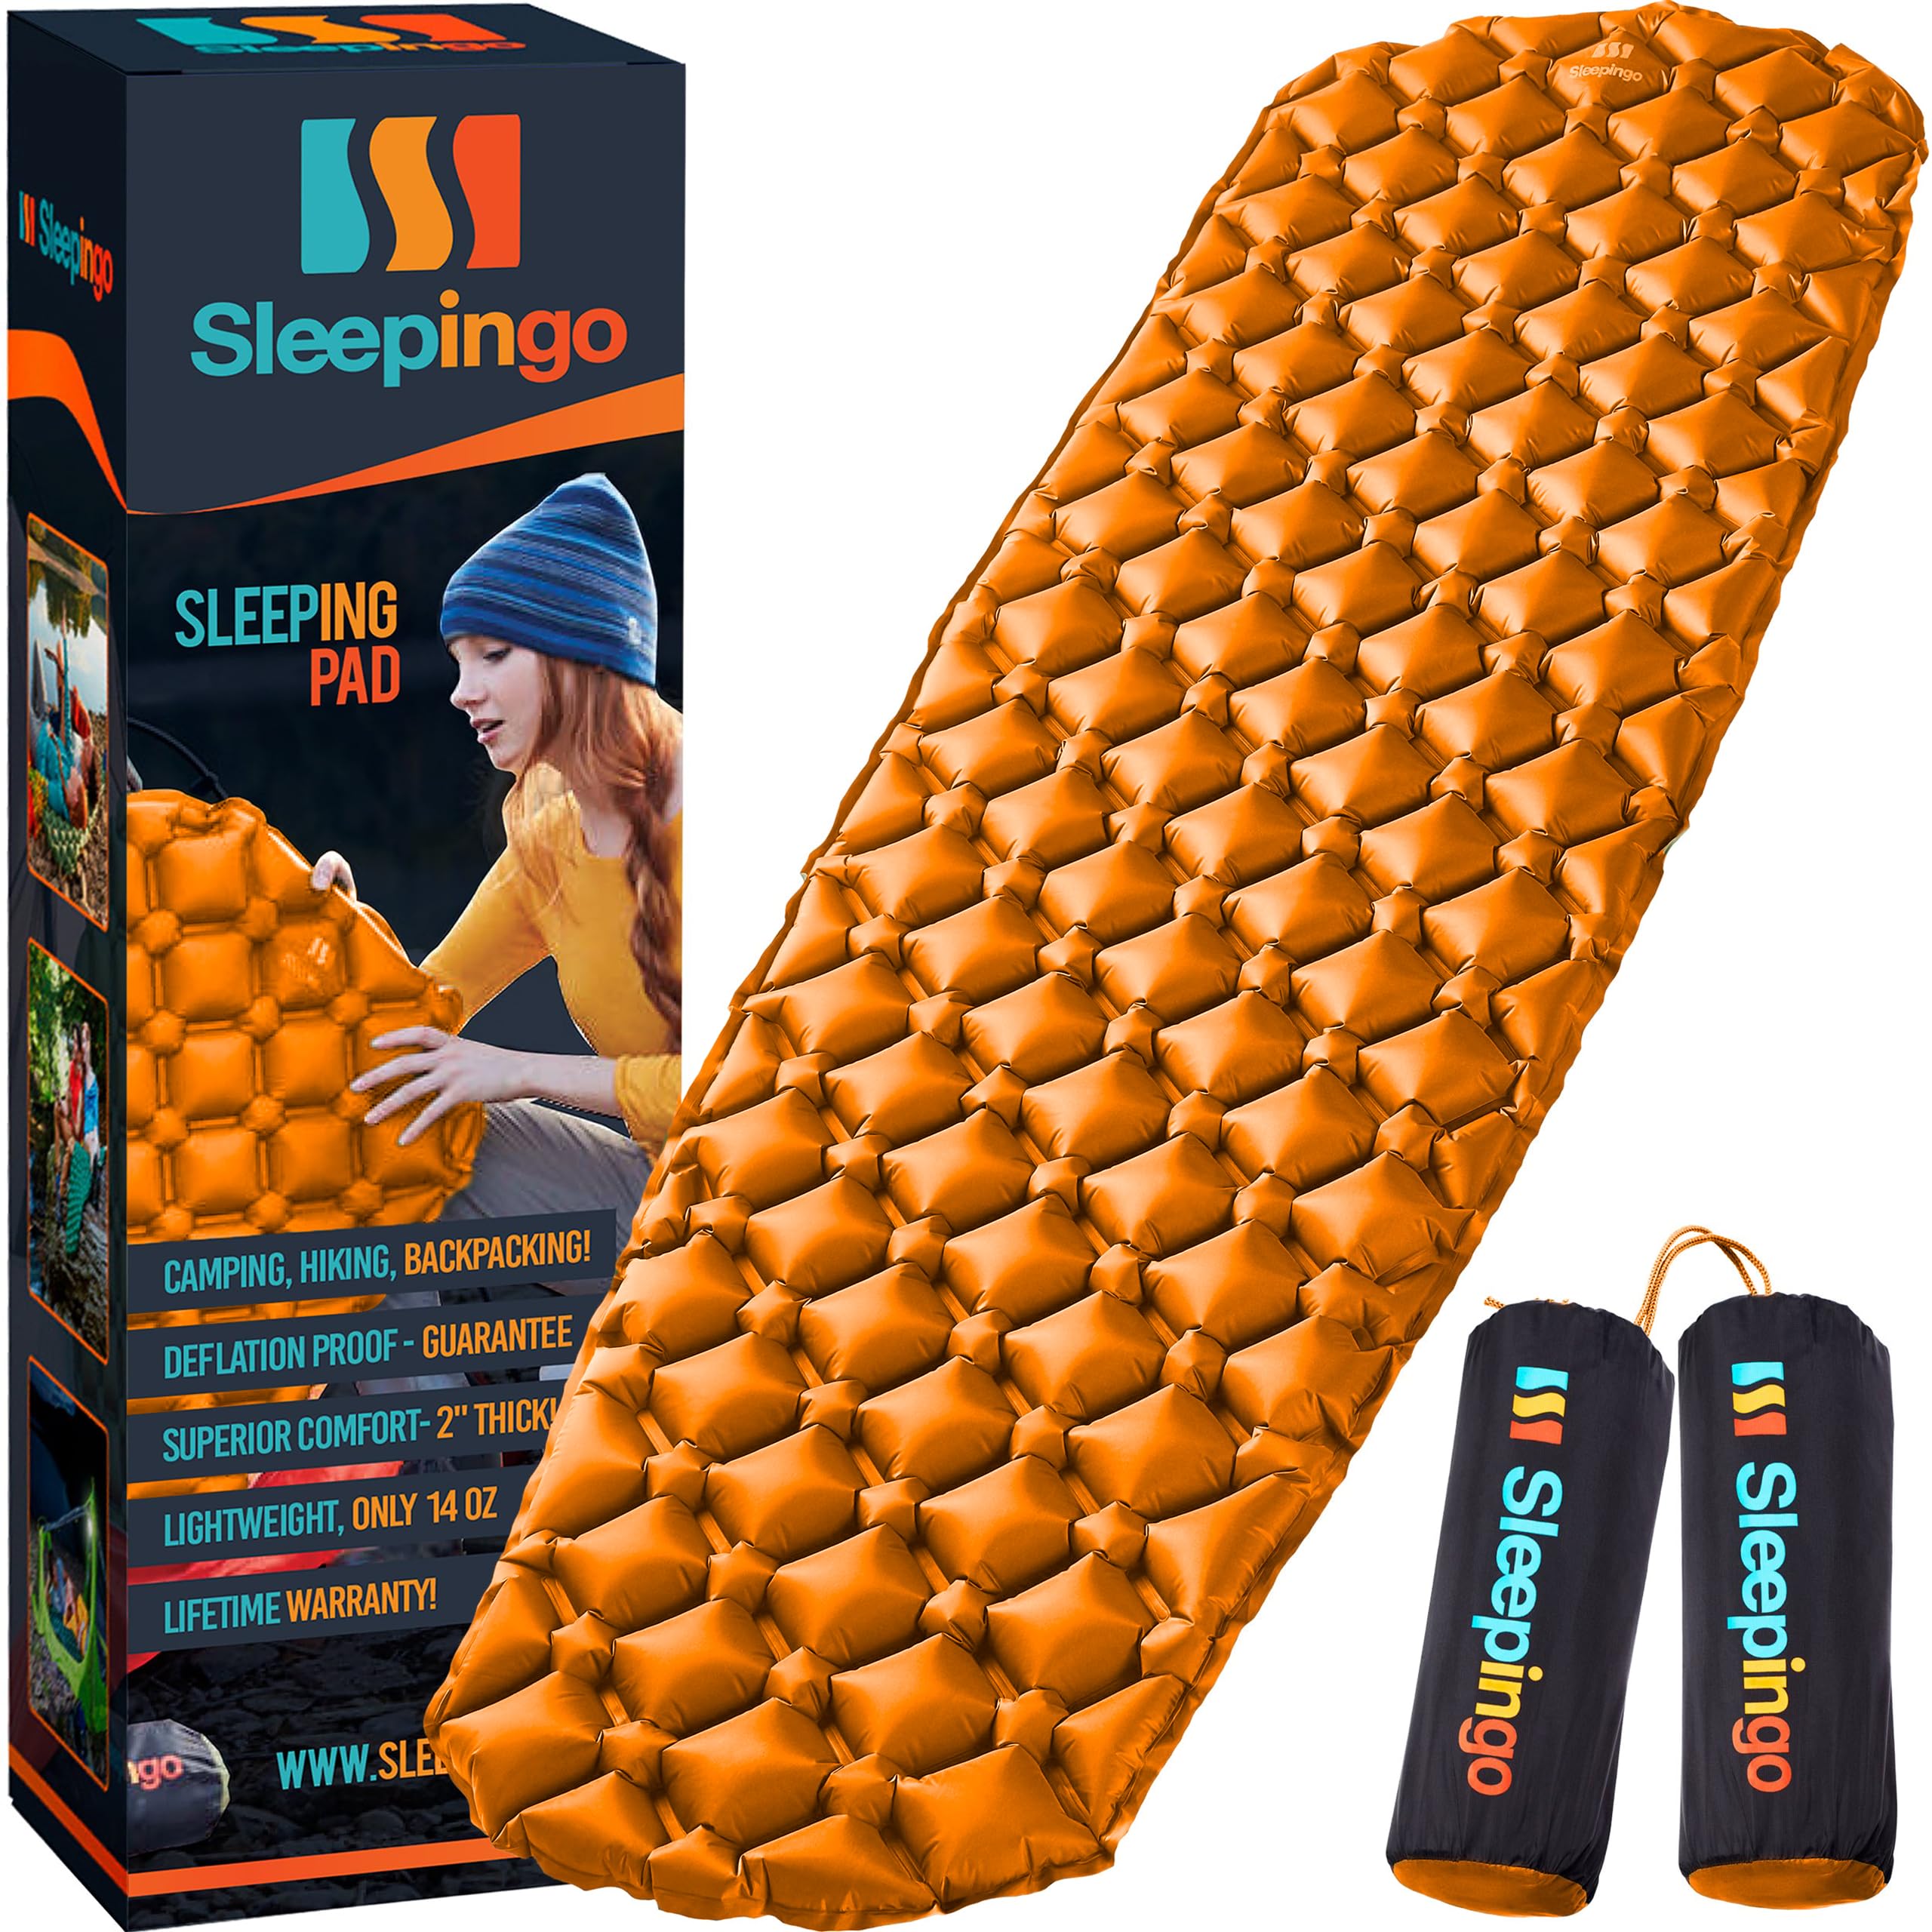 Sleepingo Sleeping Pad for Camping - Ultralight Sleeping Mat for Camping, Backpacking, Hiking - Lightweight, Inflatable & Compact Camping Air Mattress - Inflatable Camping Mat (Orange, 2 Pack)  - Like New